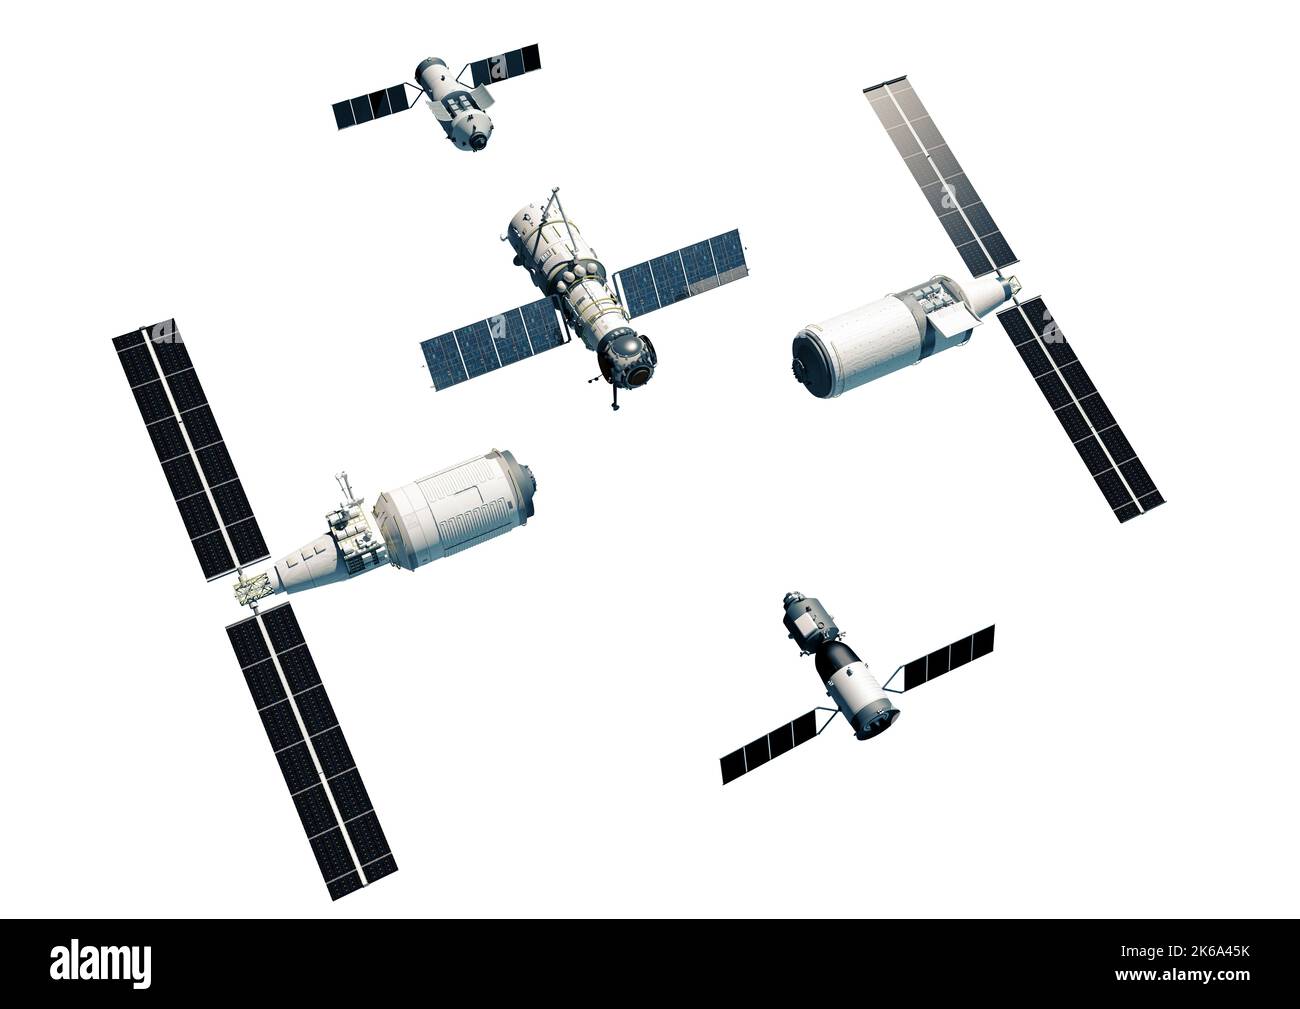 Chinese Space Station Tiangong 2022, exploded view. Stock Photo